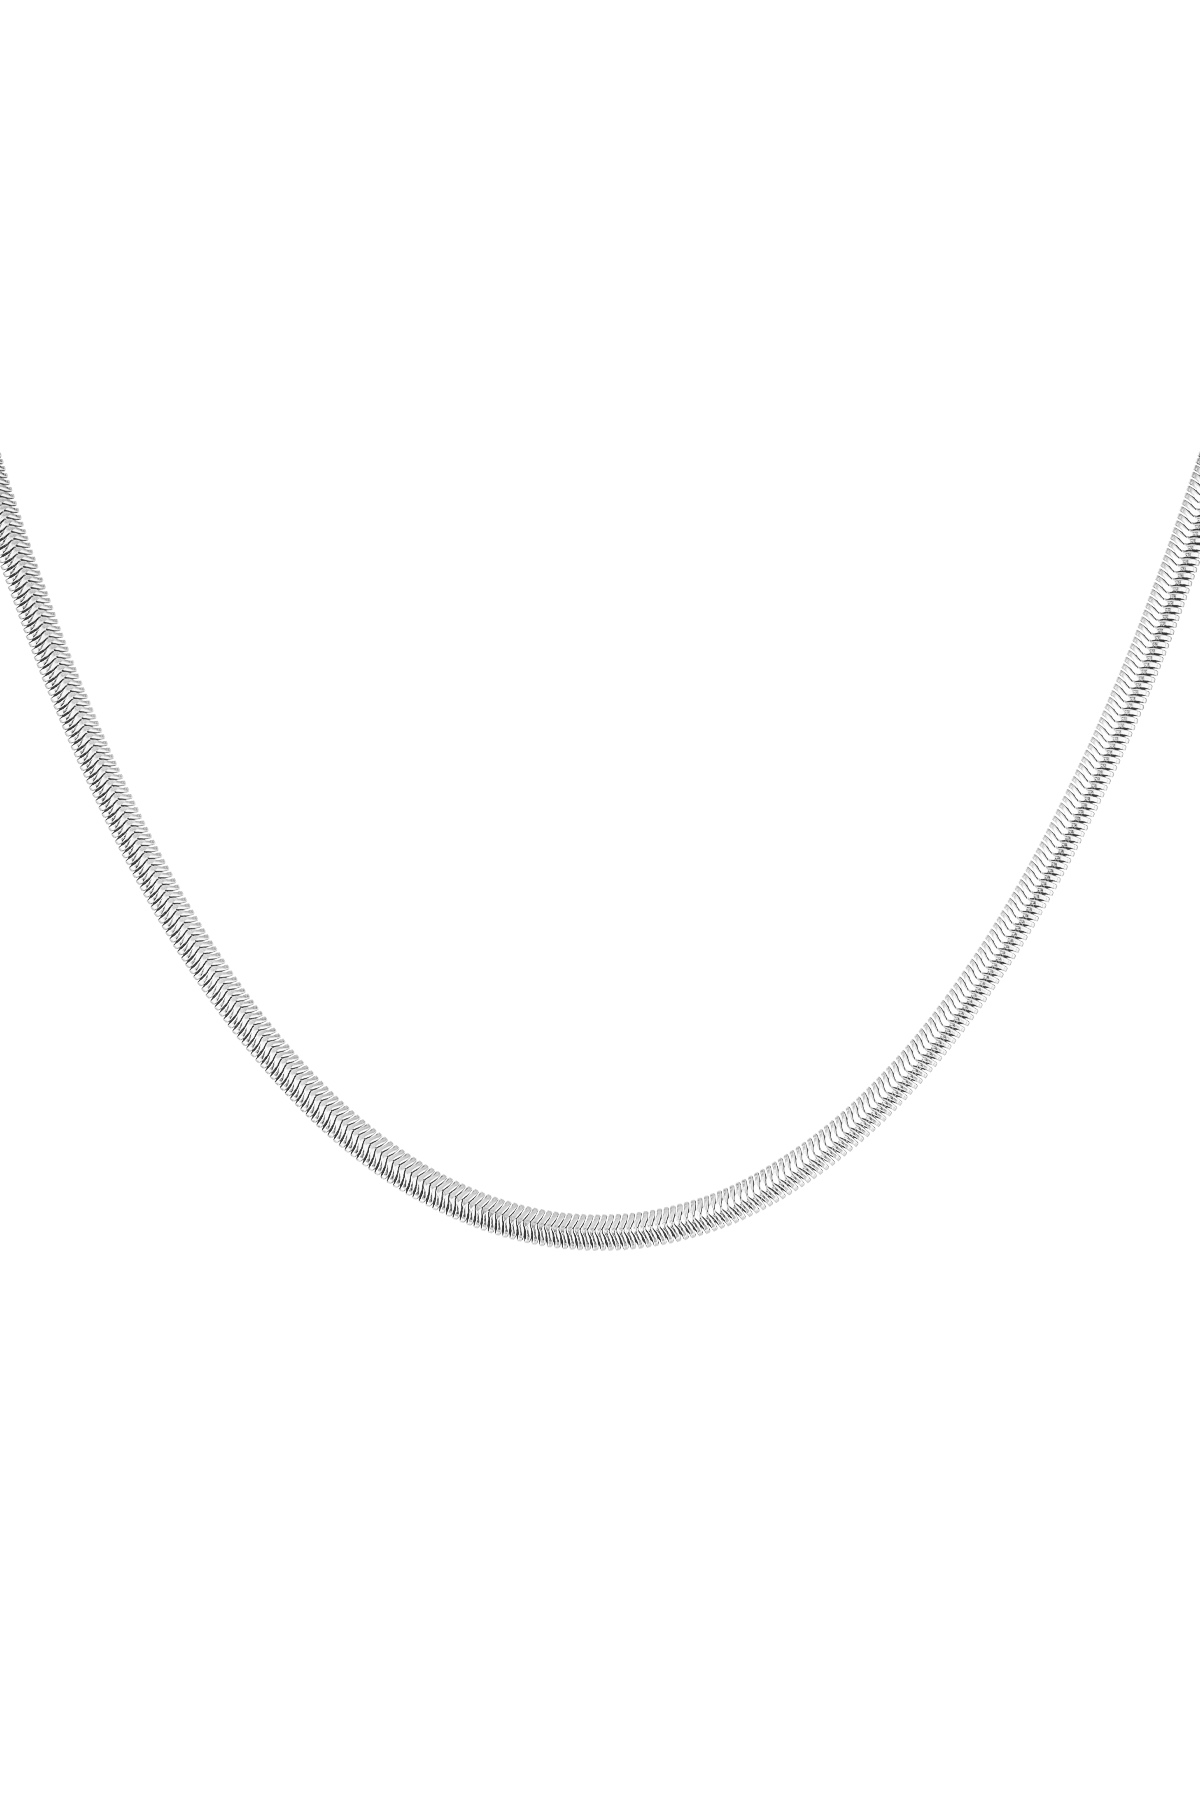 Necklace flat with print - silver-4.0MM h5 